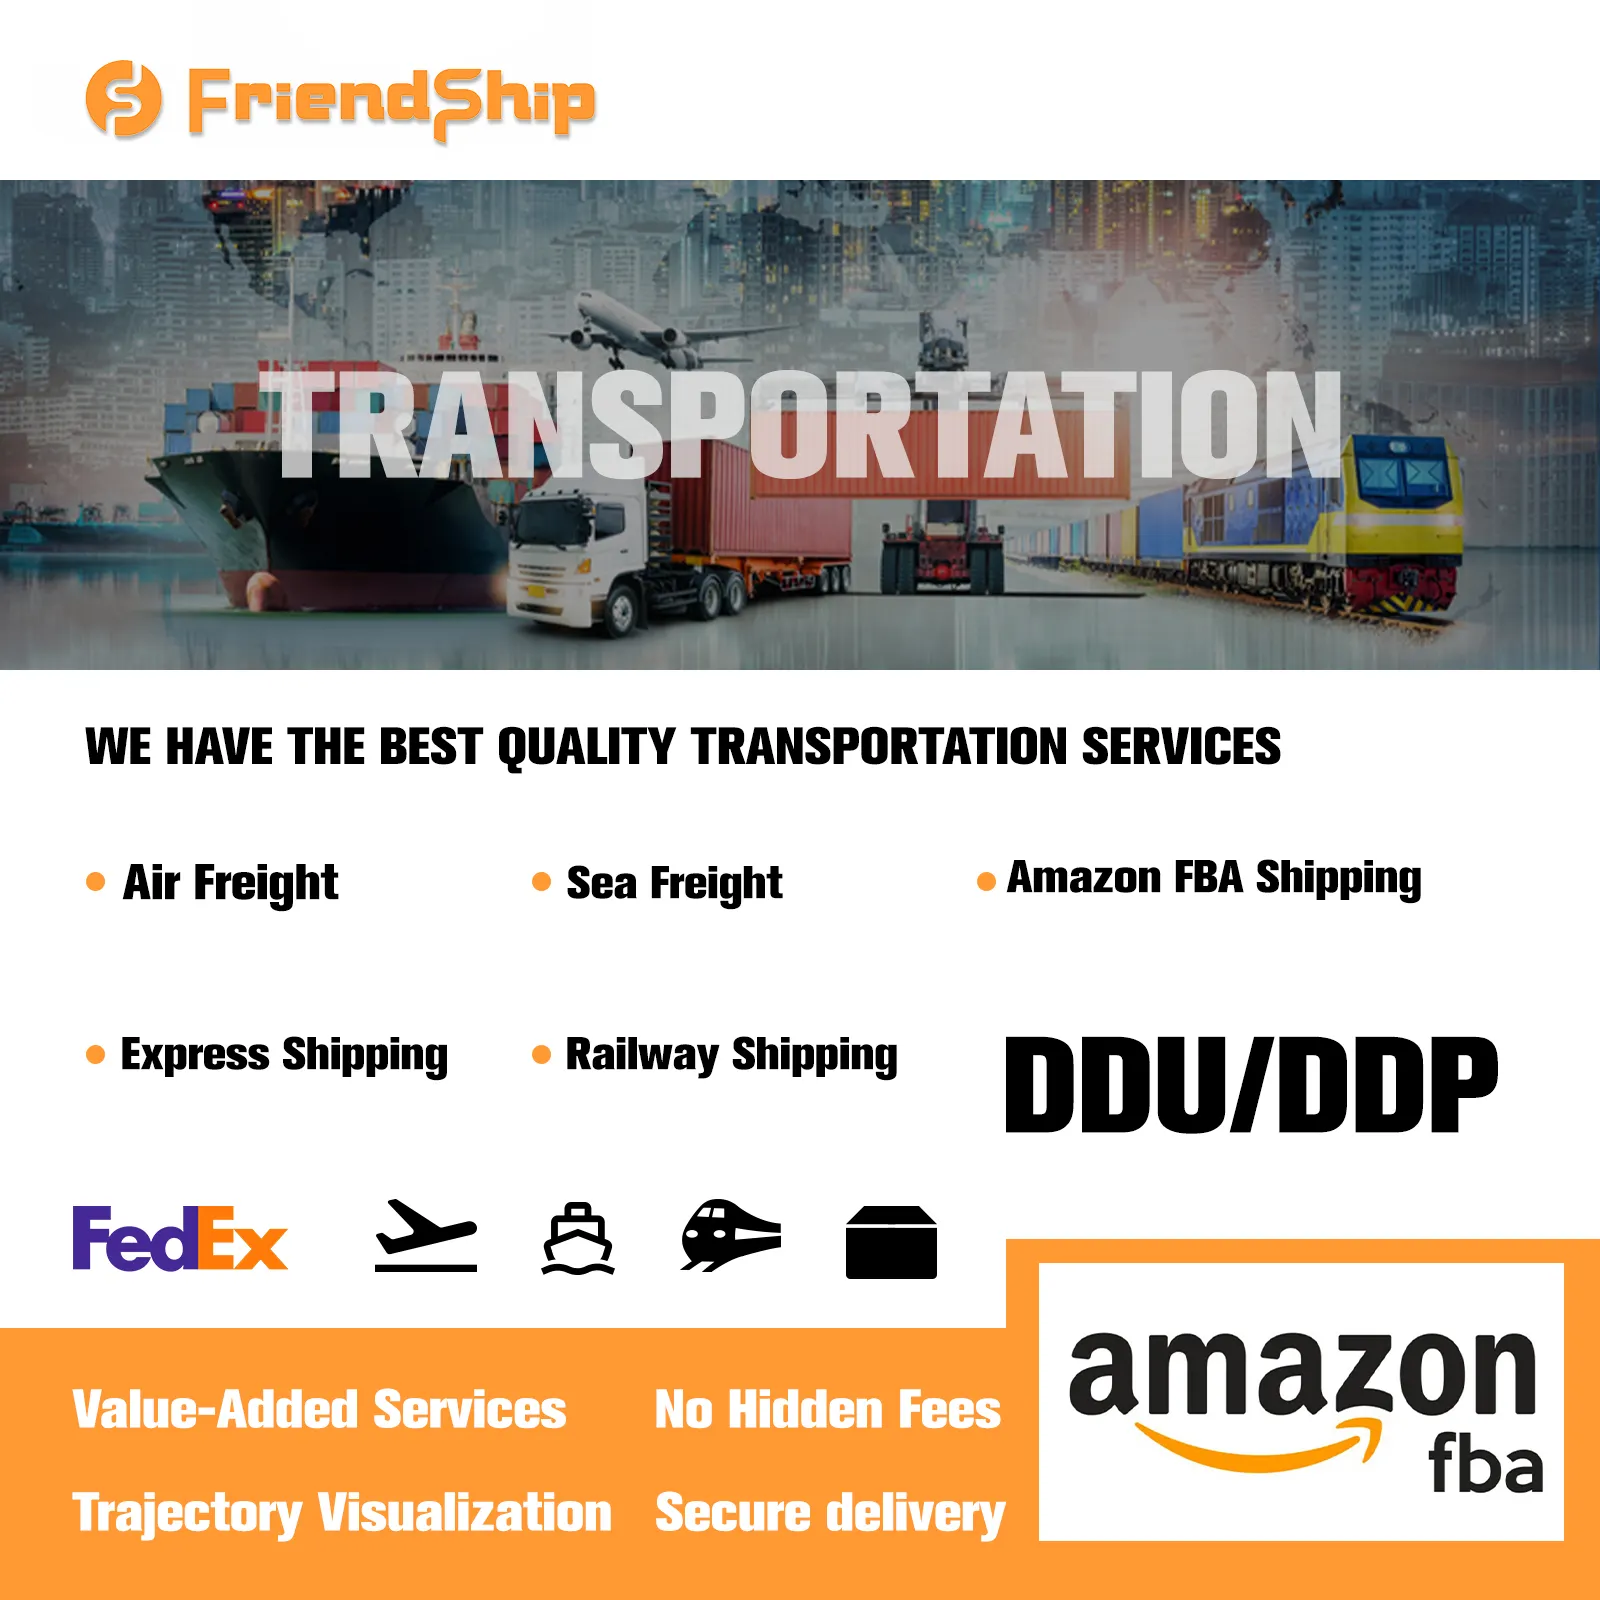 High-value One-stop Service For Quality Inspection/Freight Forwarding/Logistics/warehousing From China To The USA/Europe/SA/AE